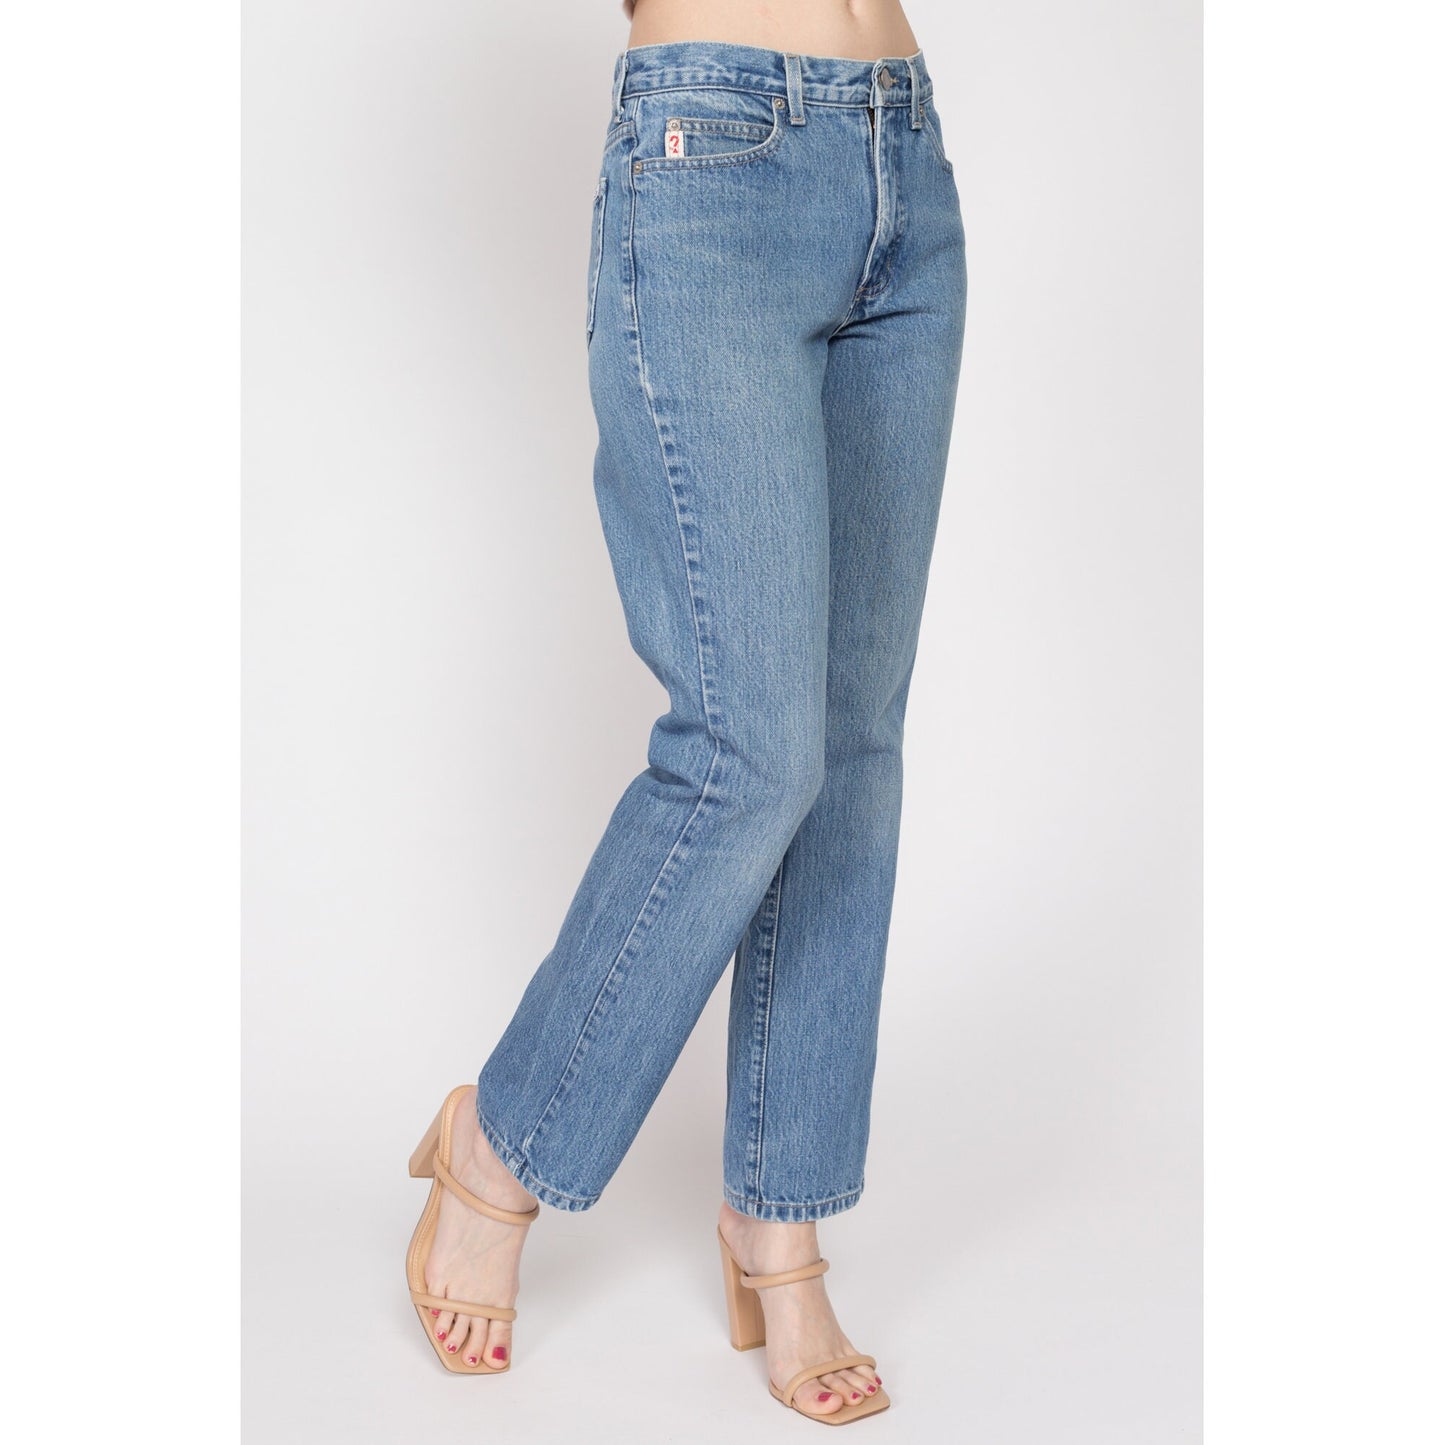 Small 90s Guess Mid Rise Straight Leg Jeans | Vintage Medium Wash Denim Mom Jeans